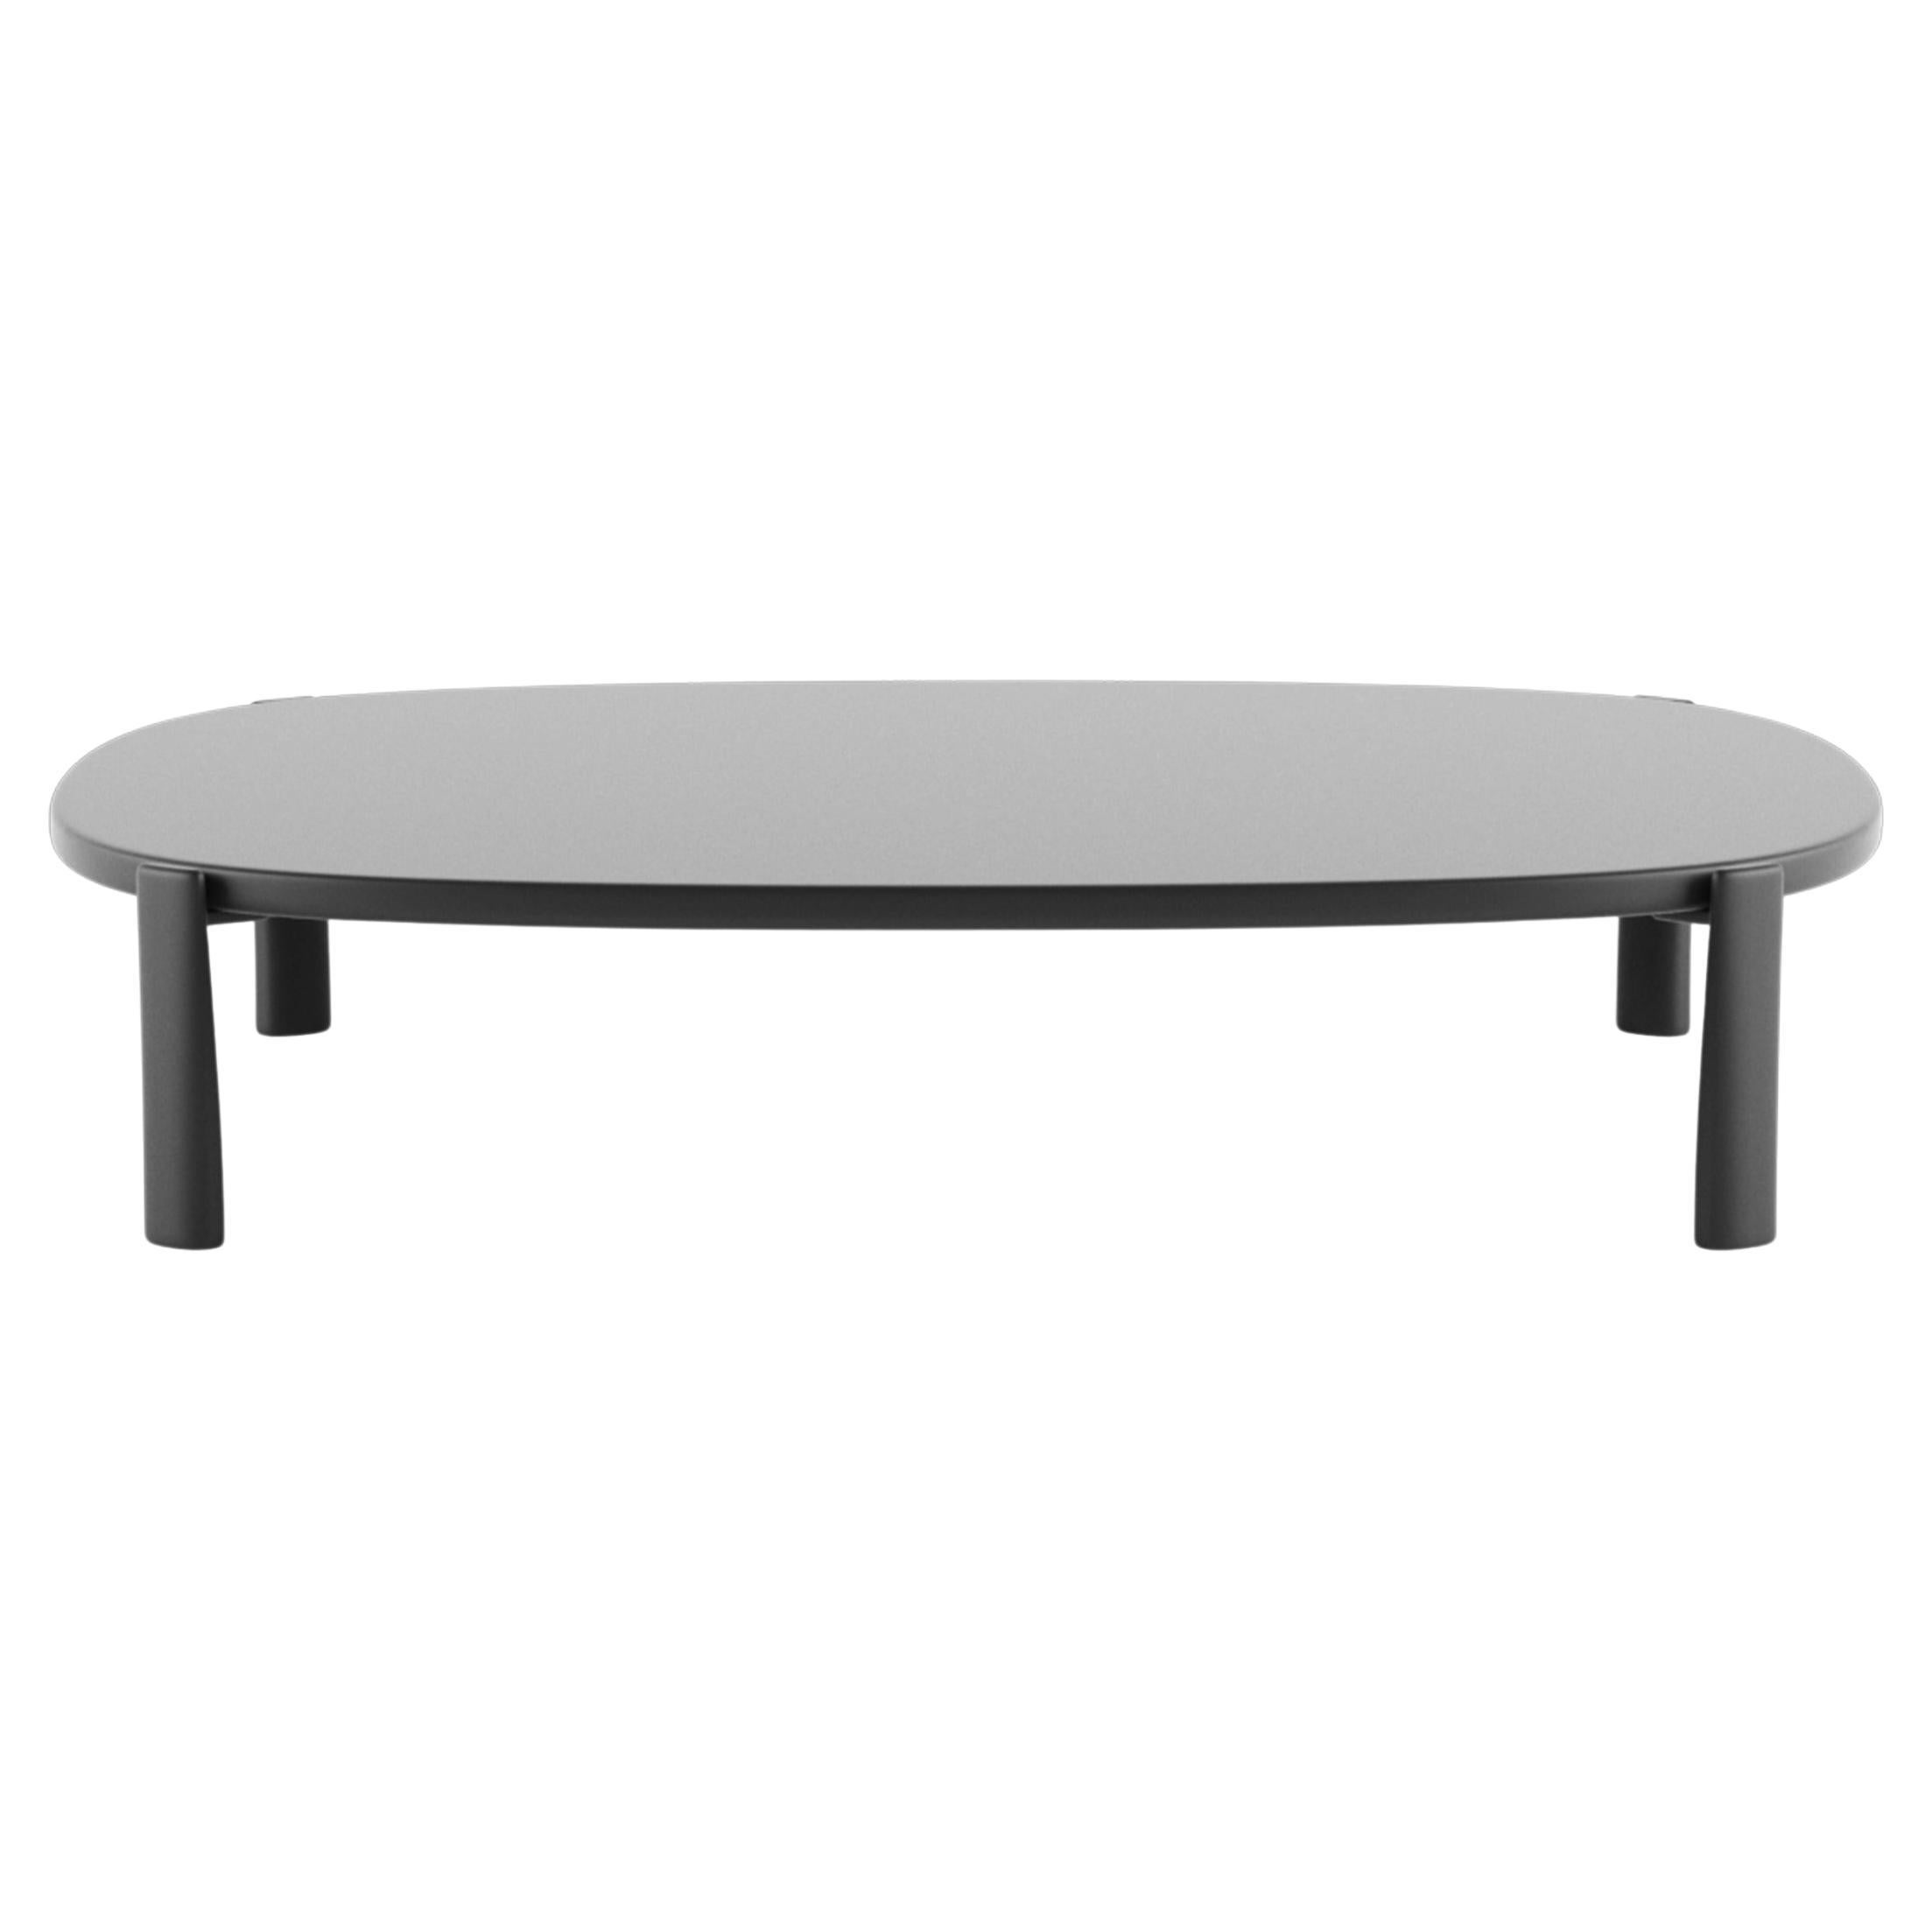 Alias T11_O Ten Outdoor Table 80x80 in Grey Glazed Ceramic Top w Lacquered Frame